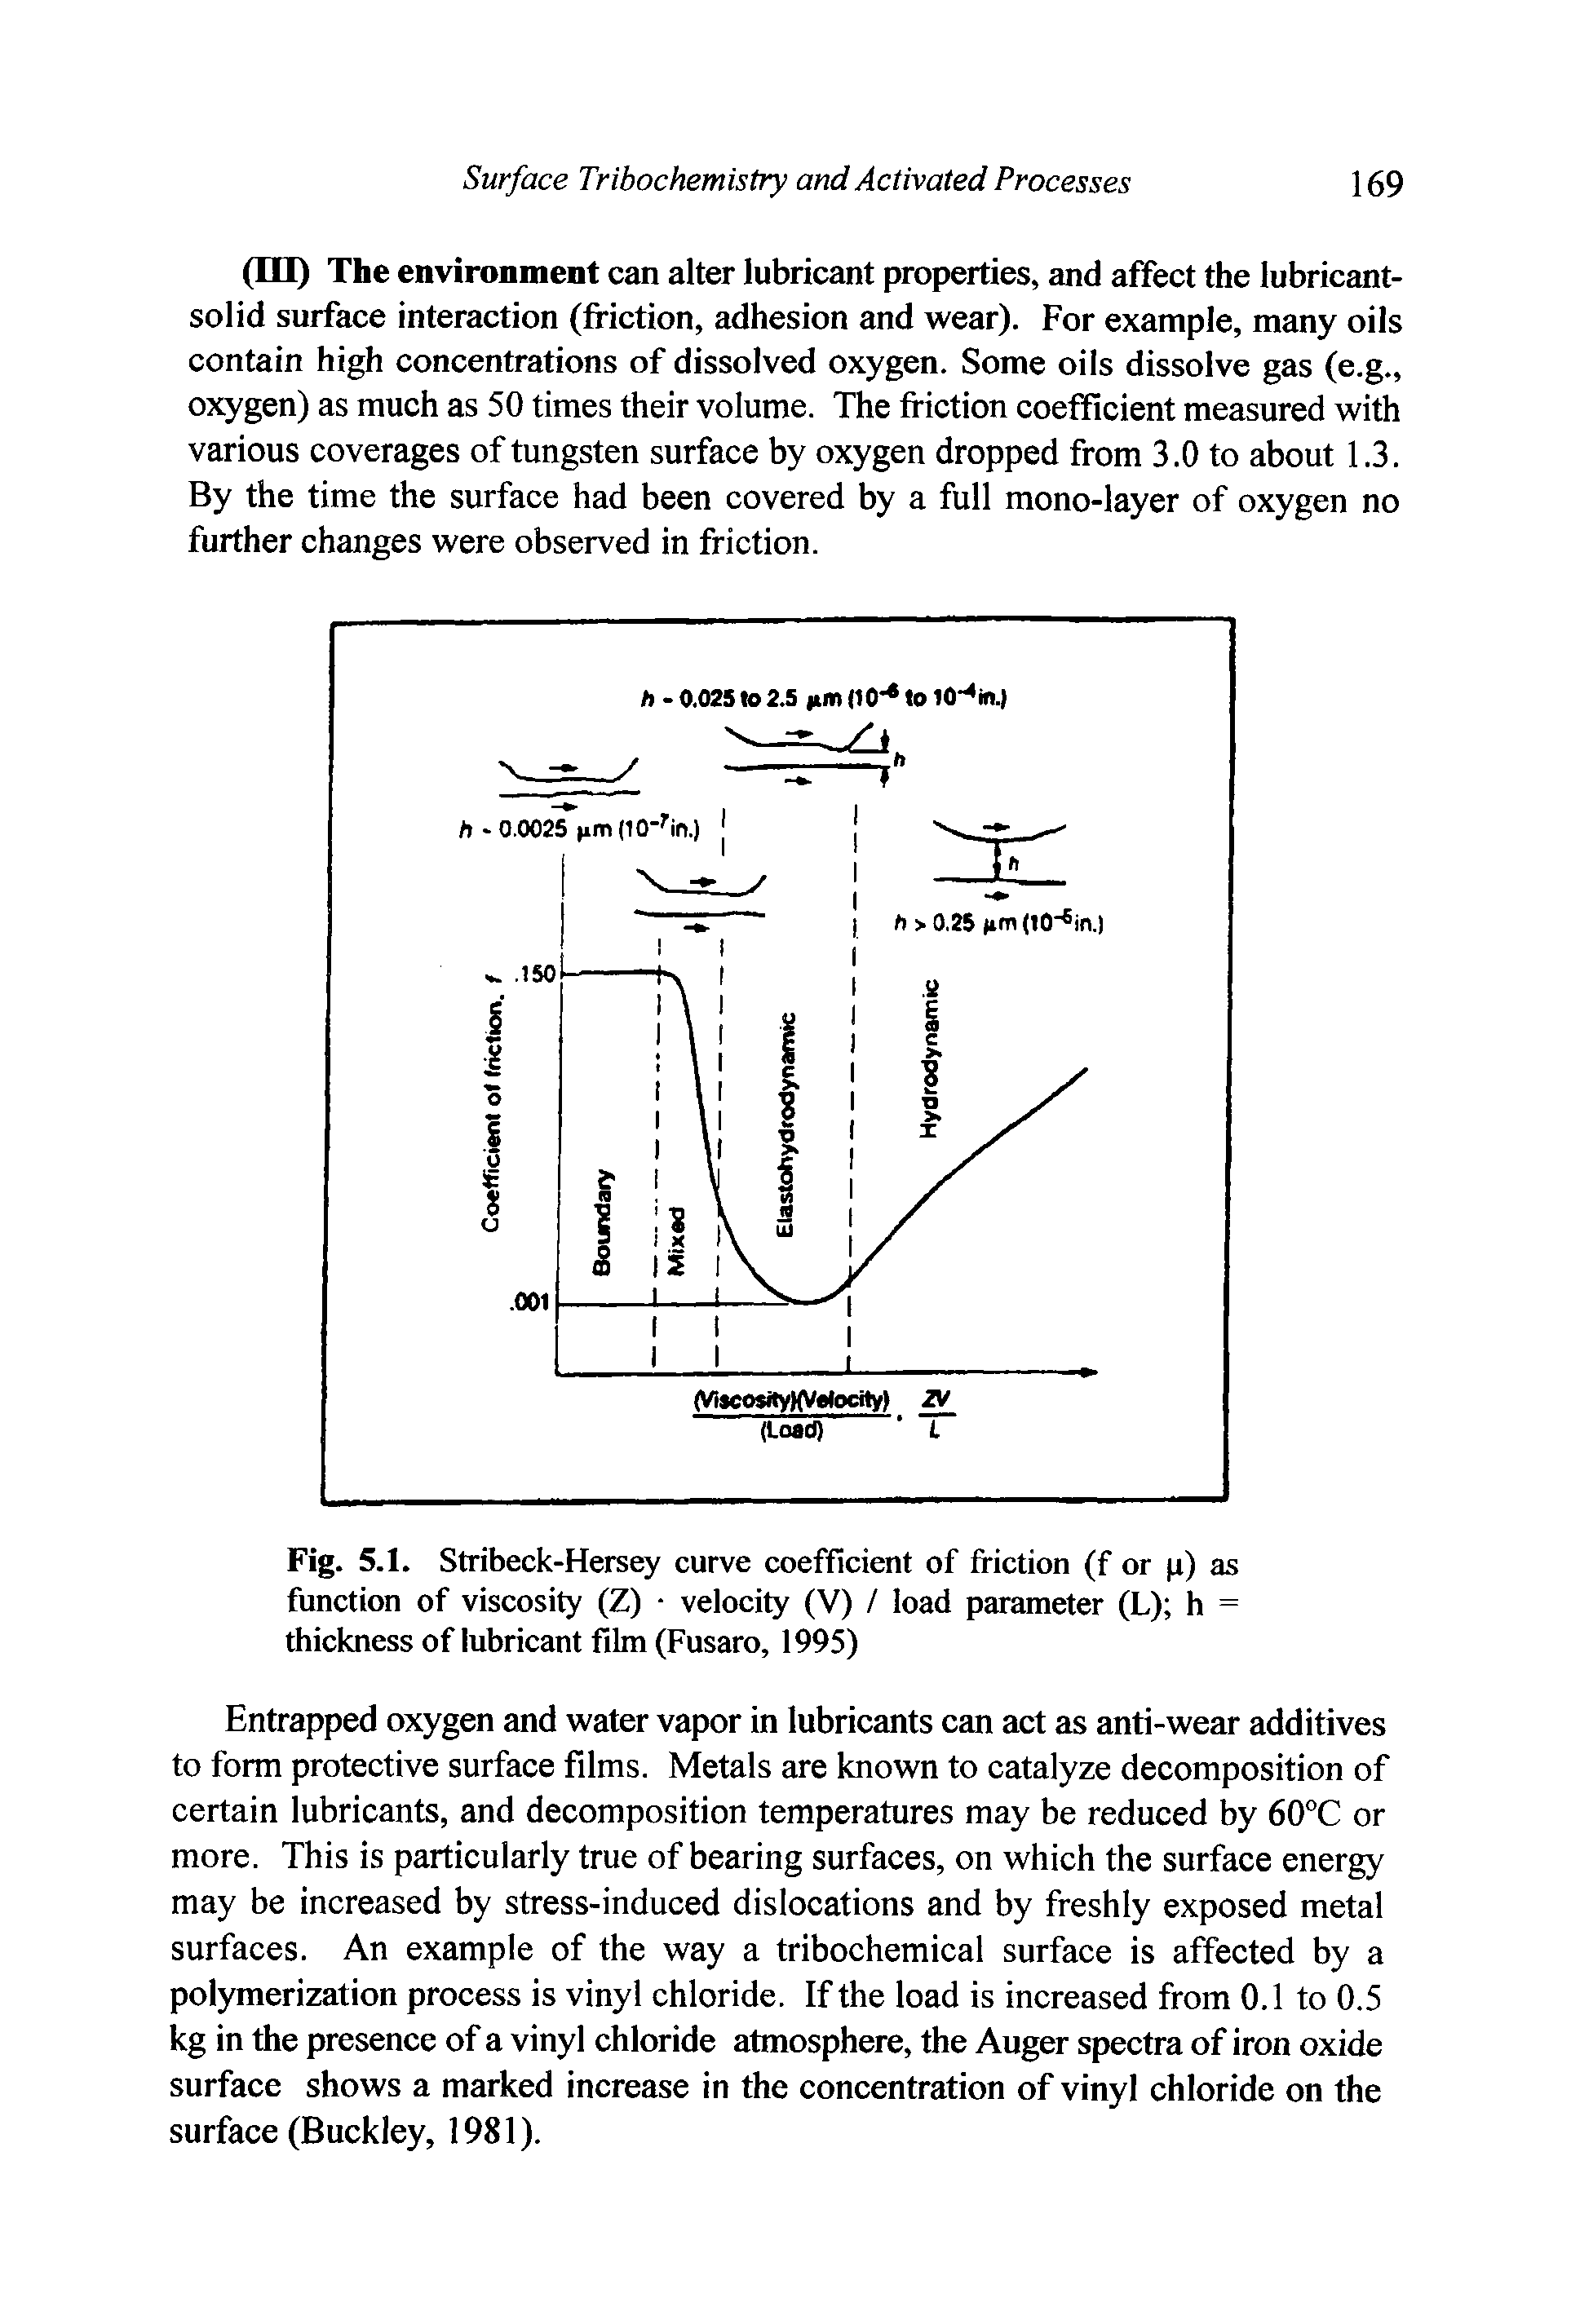 Fig. 5.1. Stribeck-Hersey curve coefficient of friction (f or p) as function of viscosity (Z) velocity (V) / load parameter (L) h = thickness of lubricant film (Fusaro, 1995)...